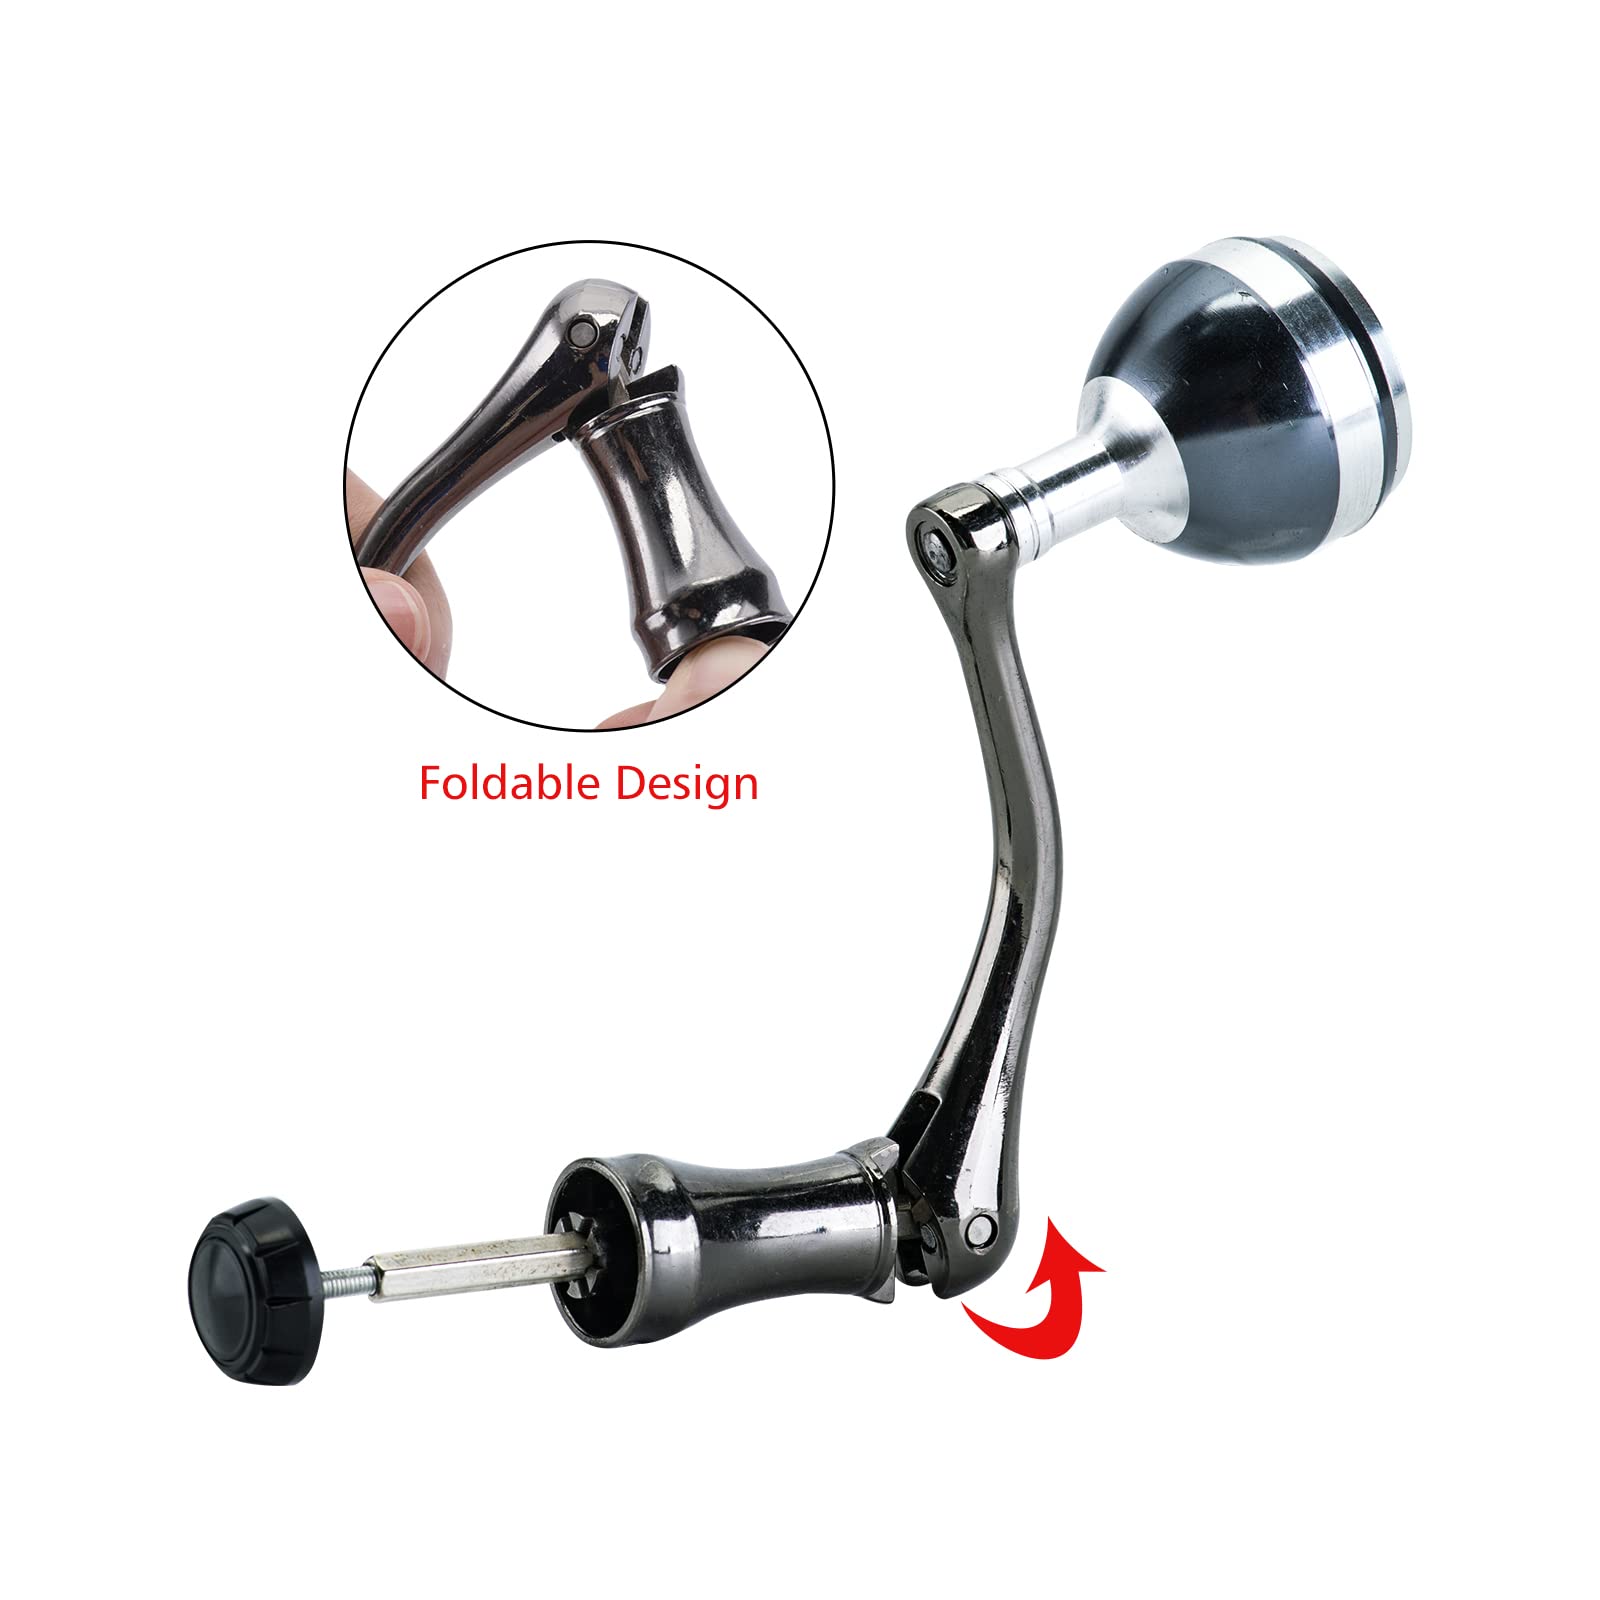 METAL SPINNING FISHING Reel Double Rocker Arm Modified Handle For